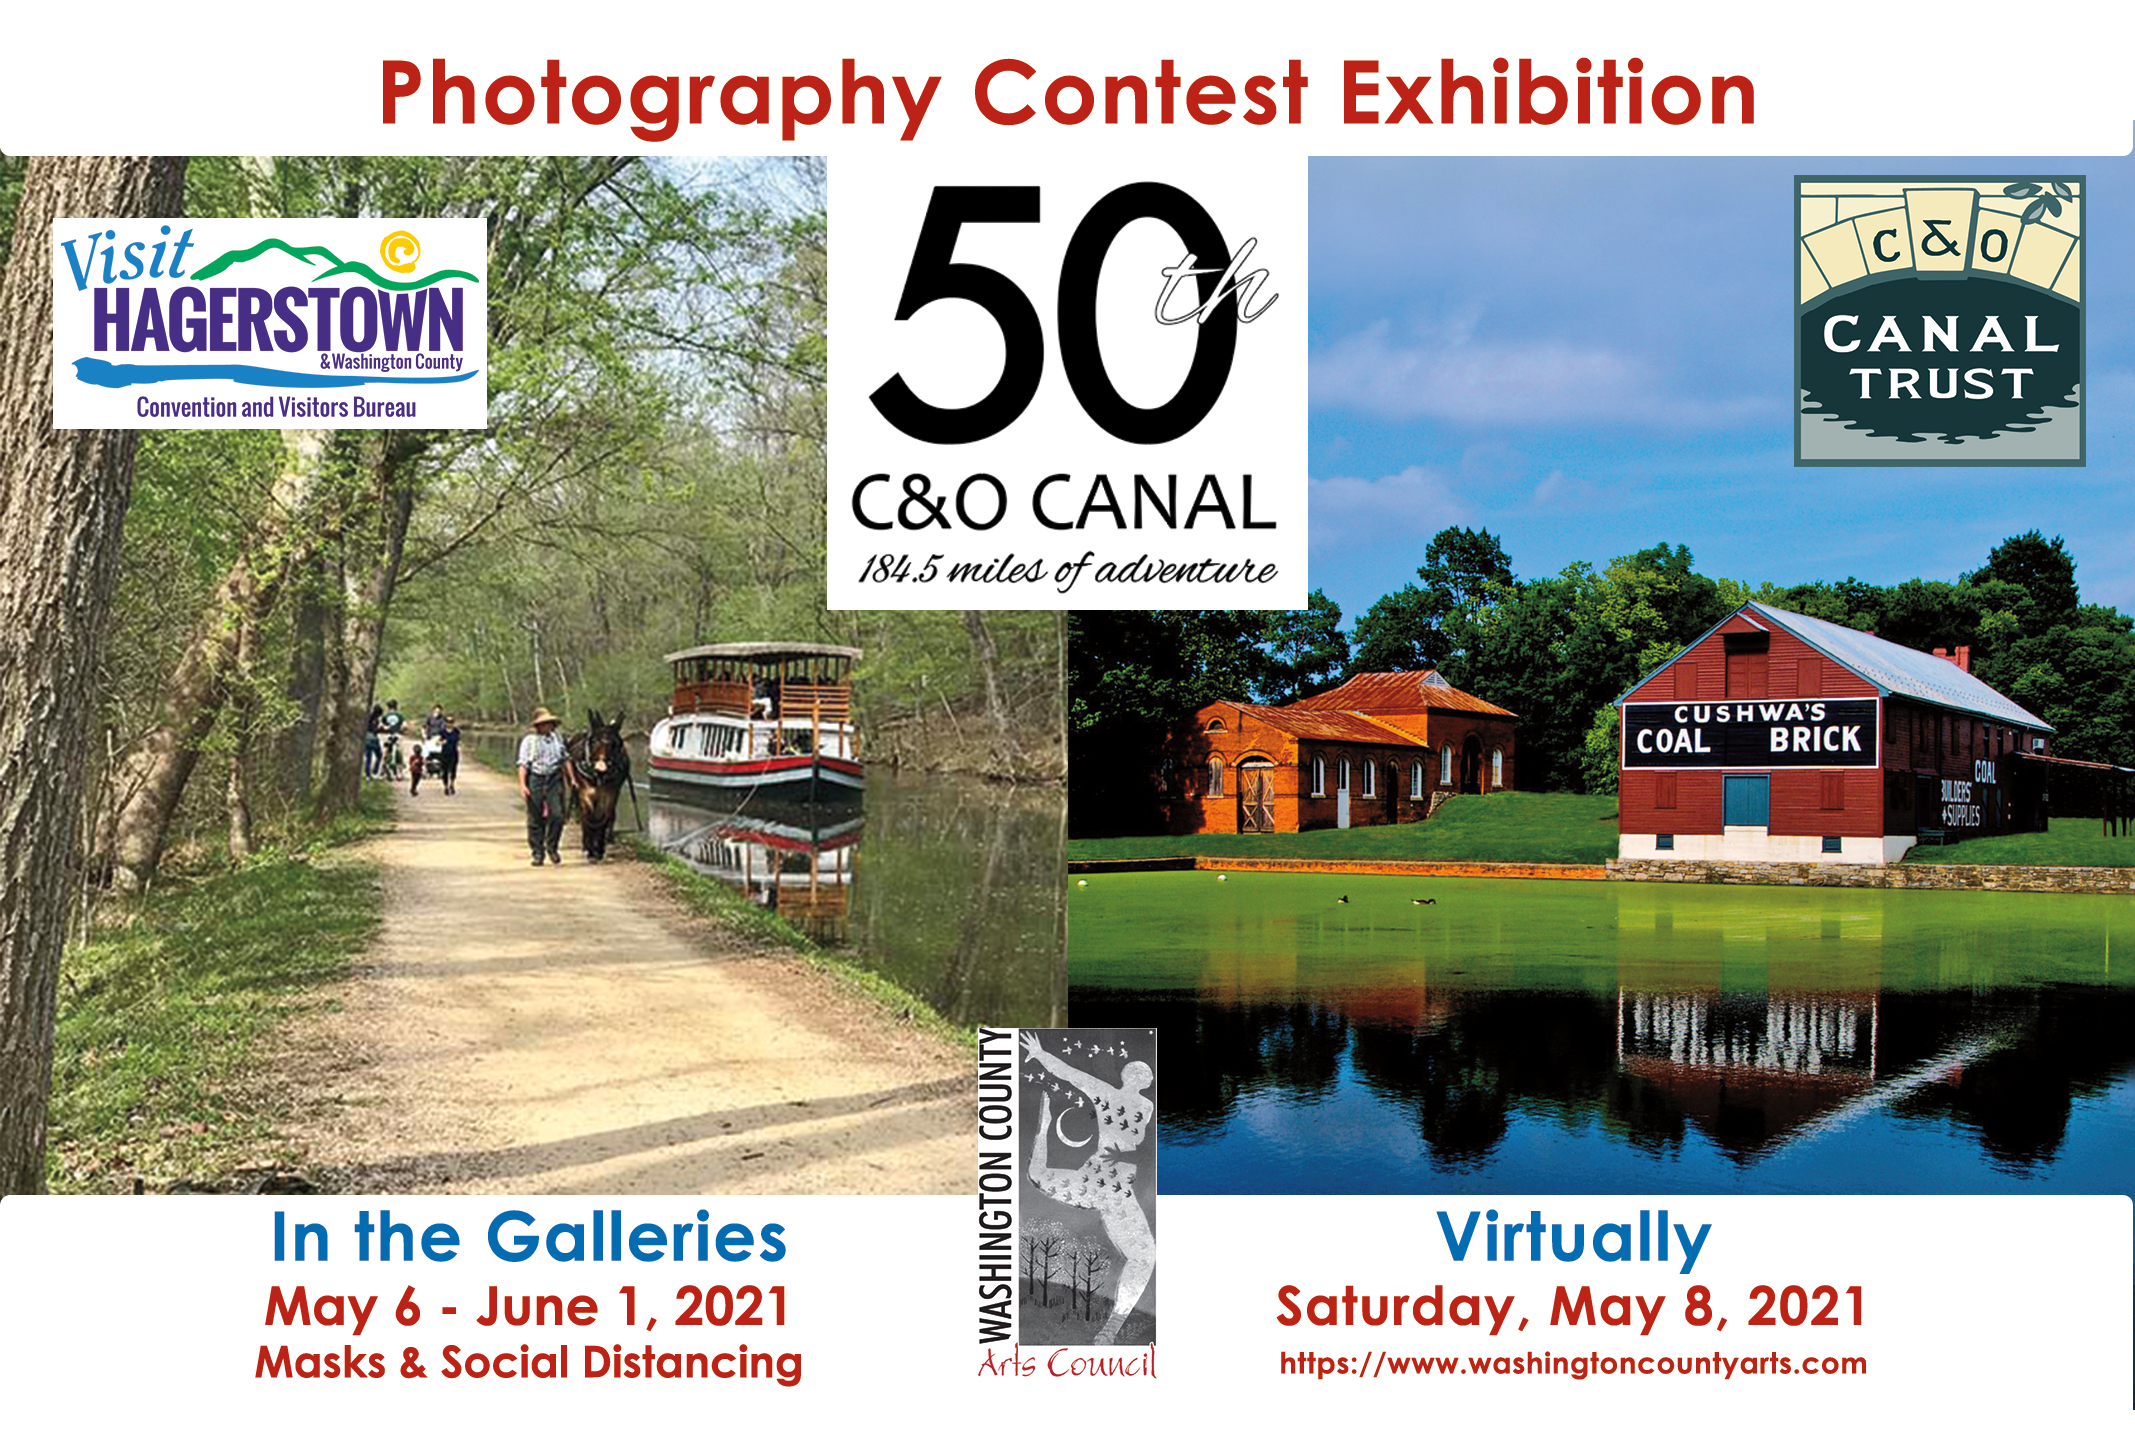 C&O Canal 50th Anniversary Juried Photography Exhibition